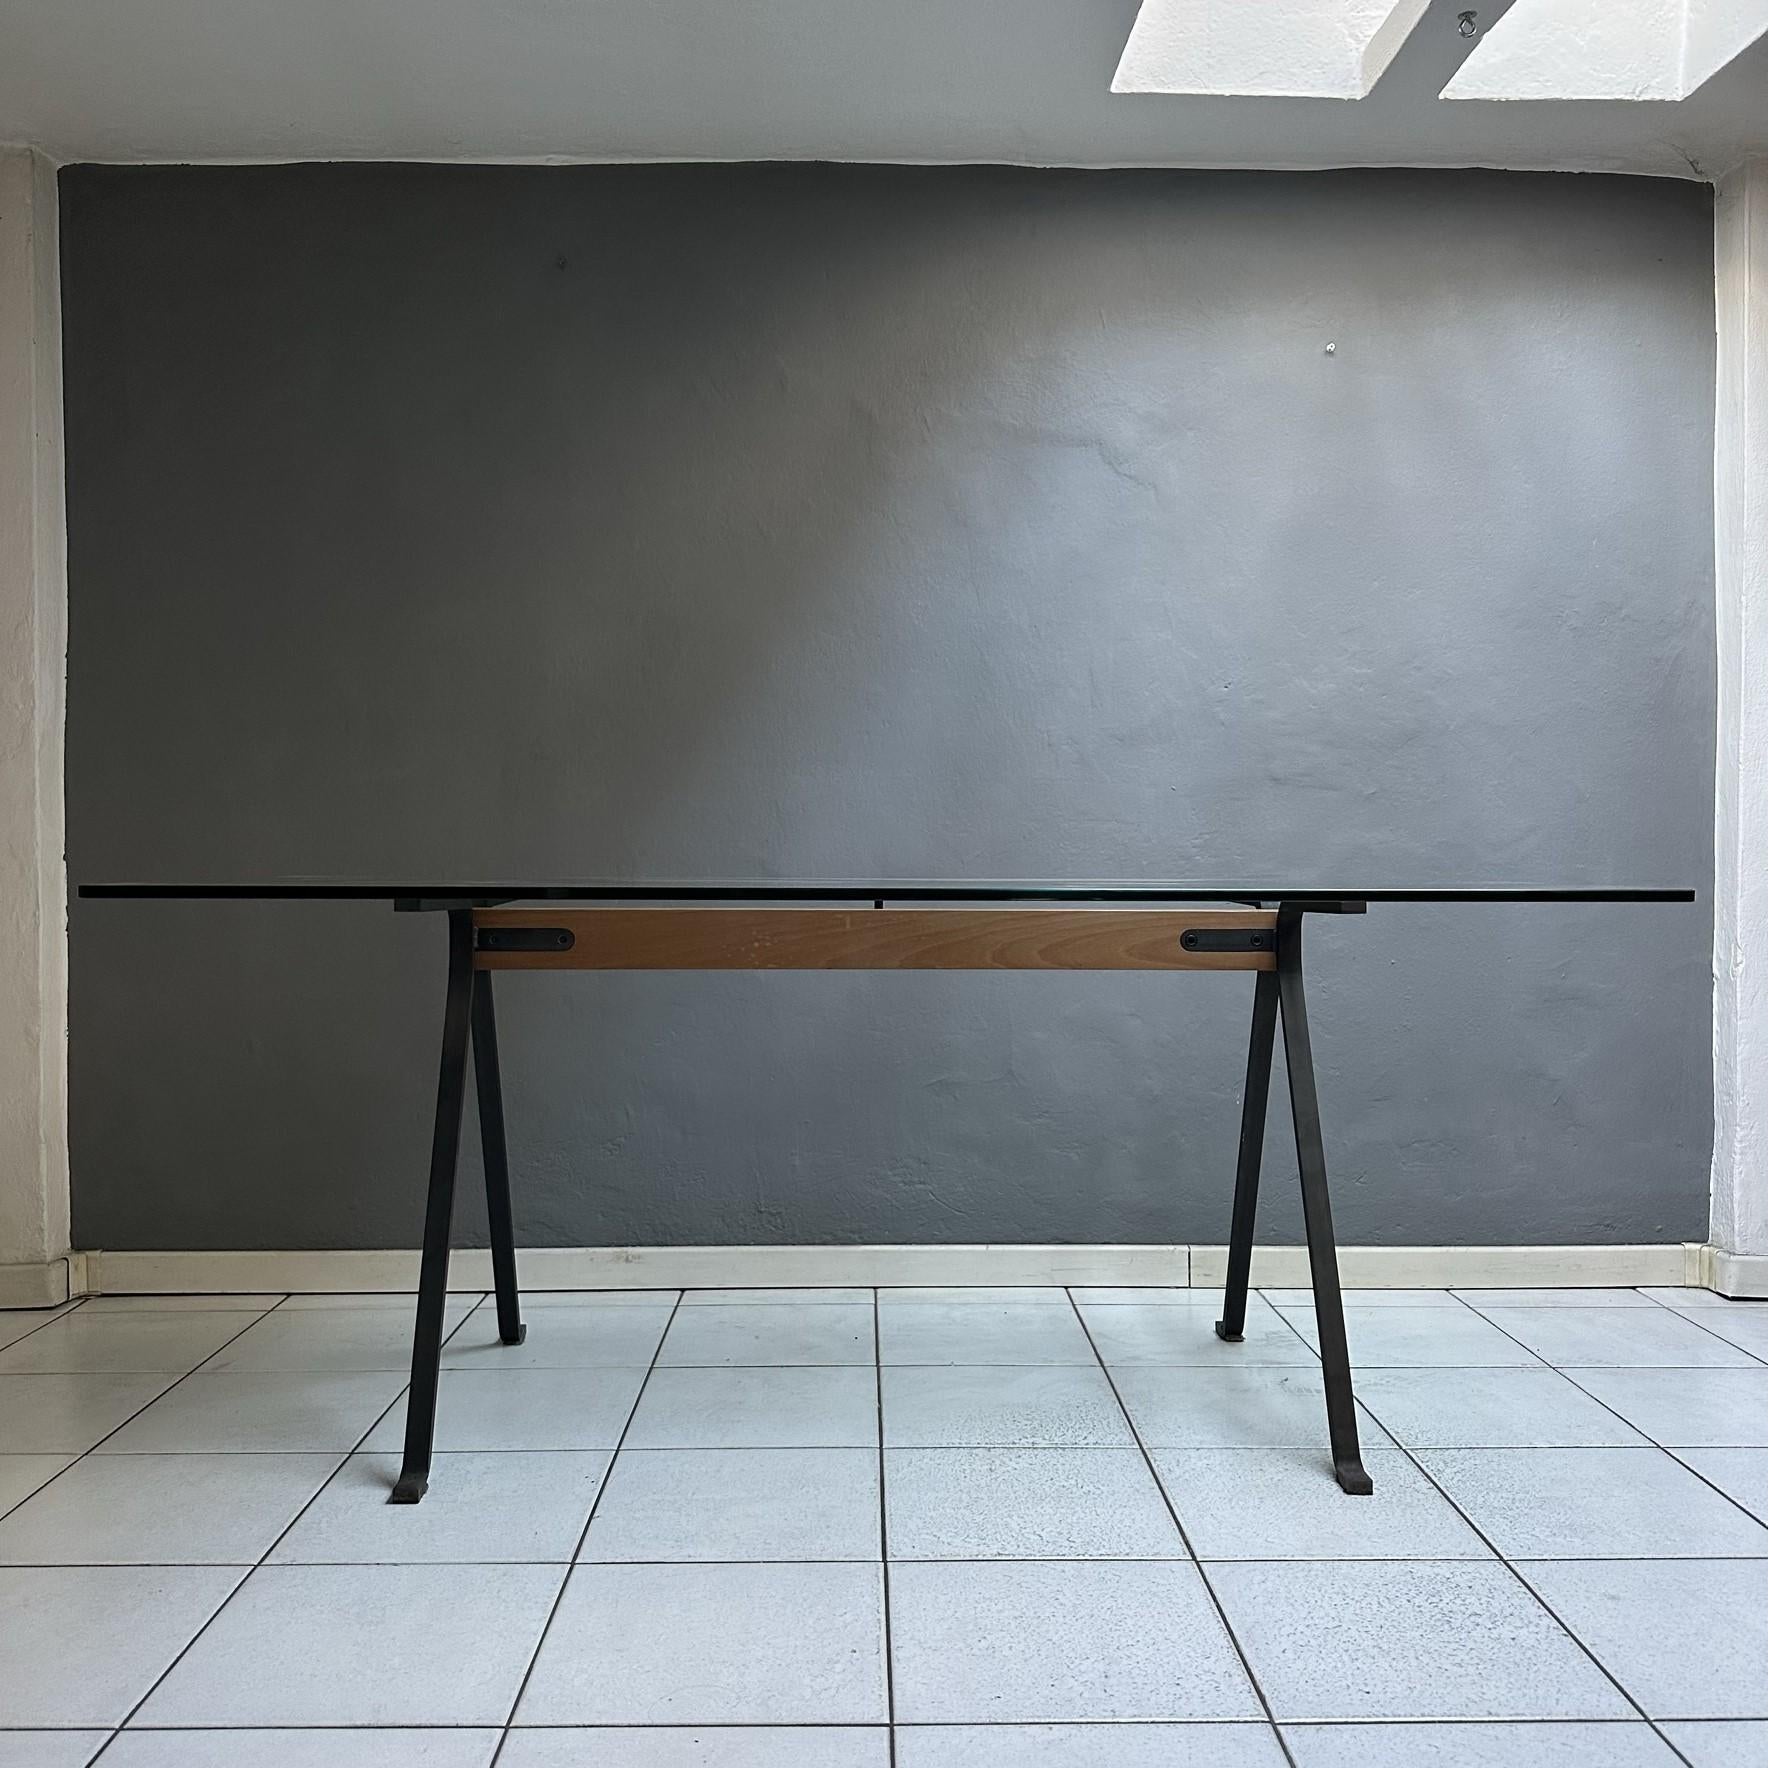 Dining table mod. Frate, designed by Enzo Mari in 1973 produced by Driade in the 80s.
Rectangular top in tempered glass with rounded corners. 
The structure is composed of a solid wood beam, legs in anthracite black painted steel.
